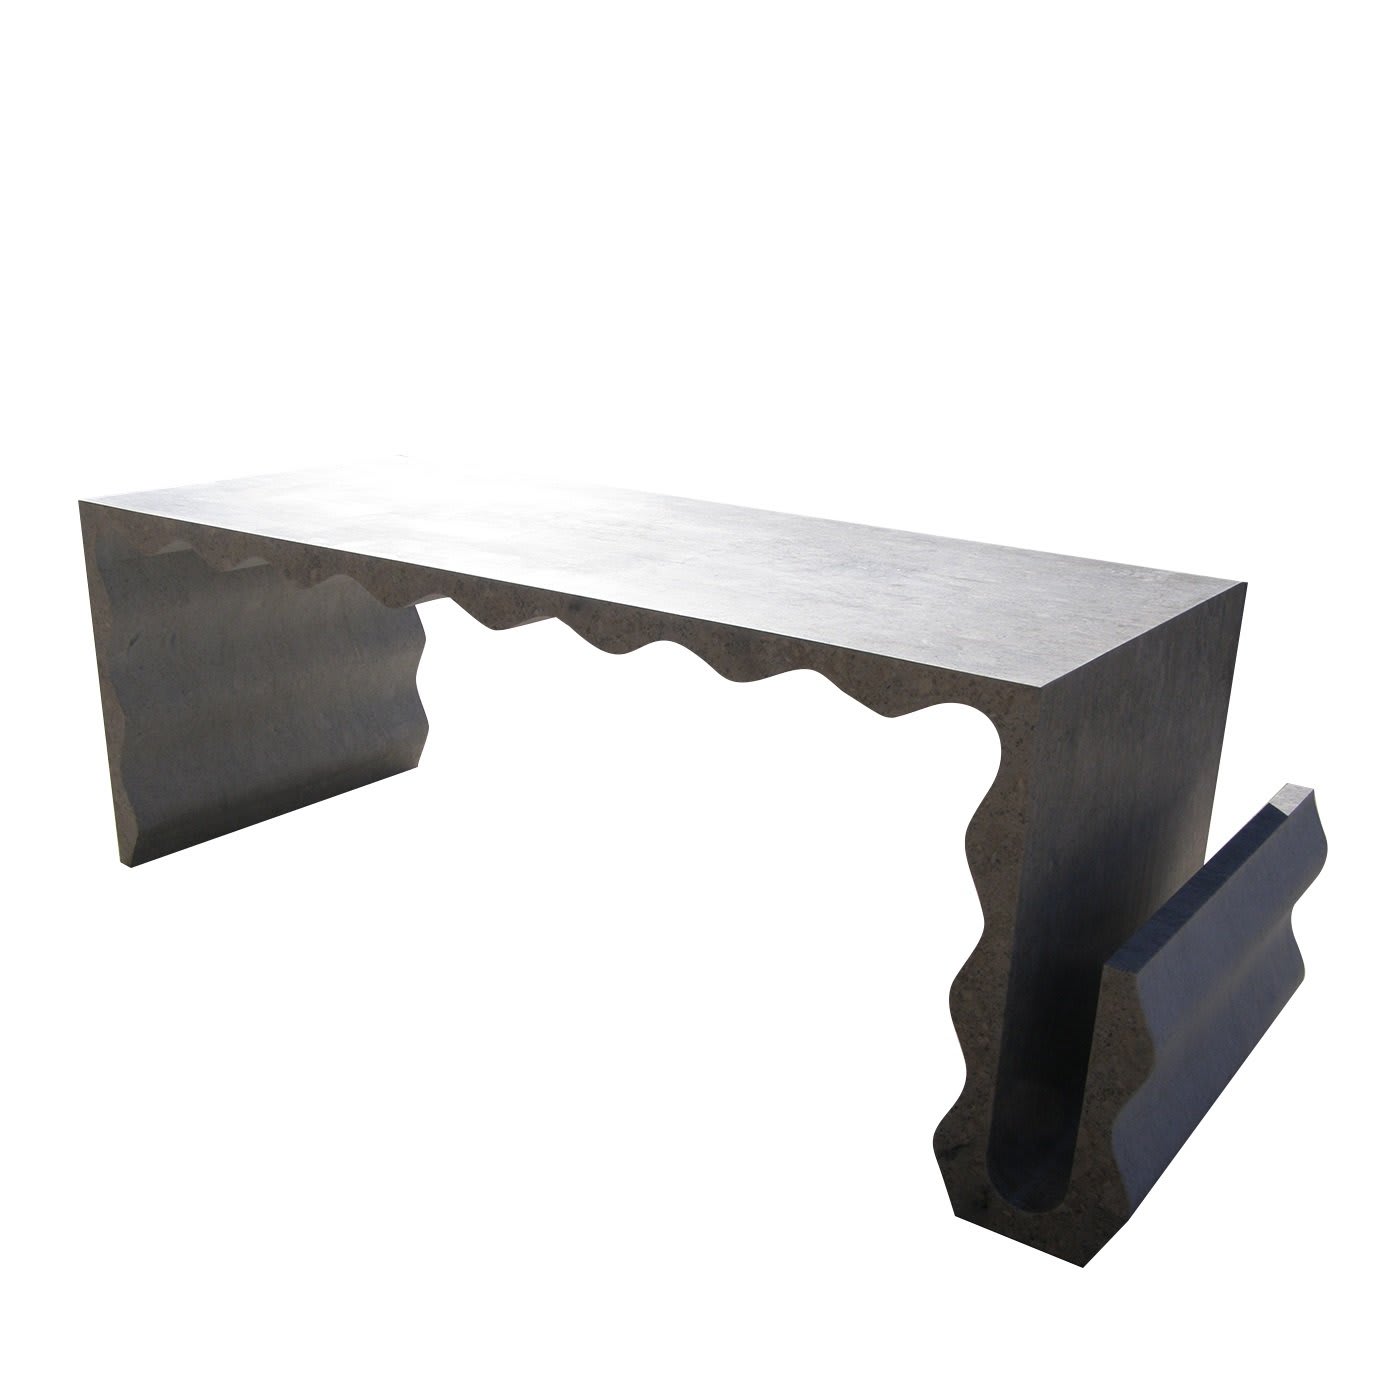 Optable Marble Coffee table by Mauro Dell'Orco - Faedo